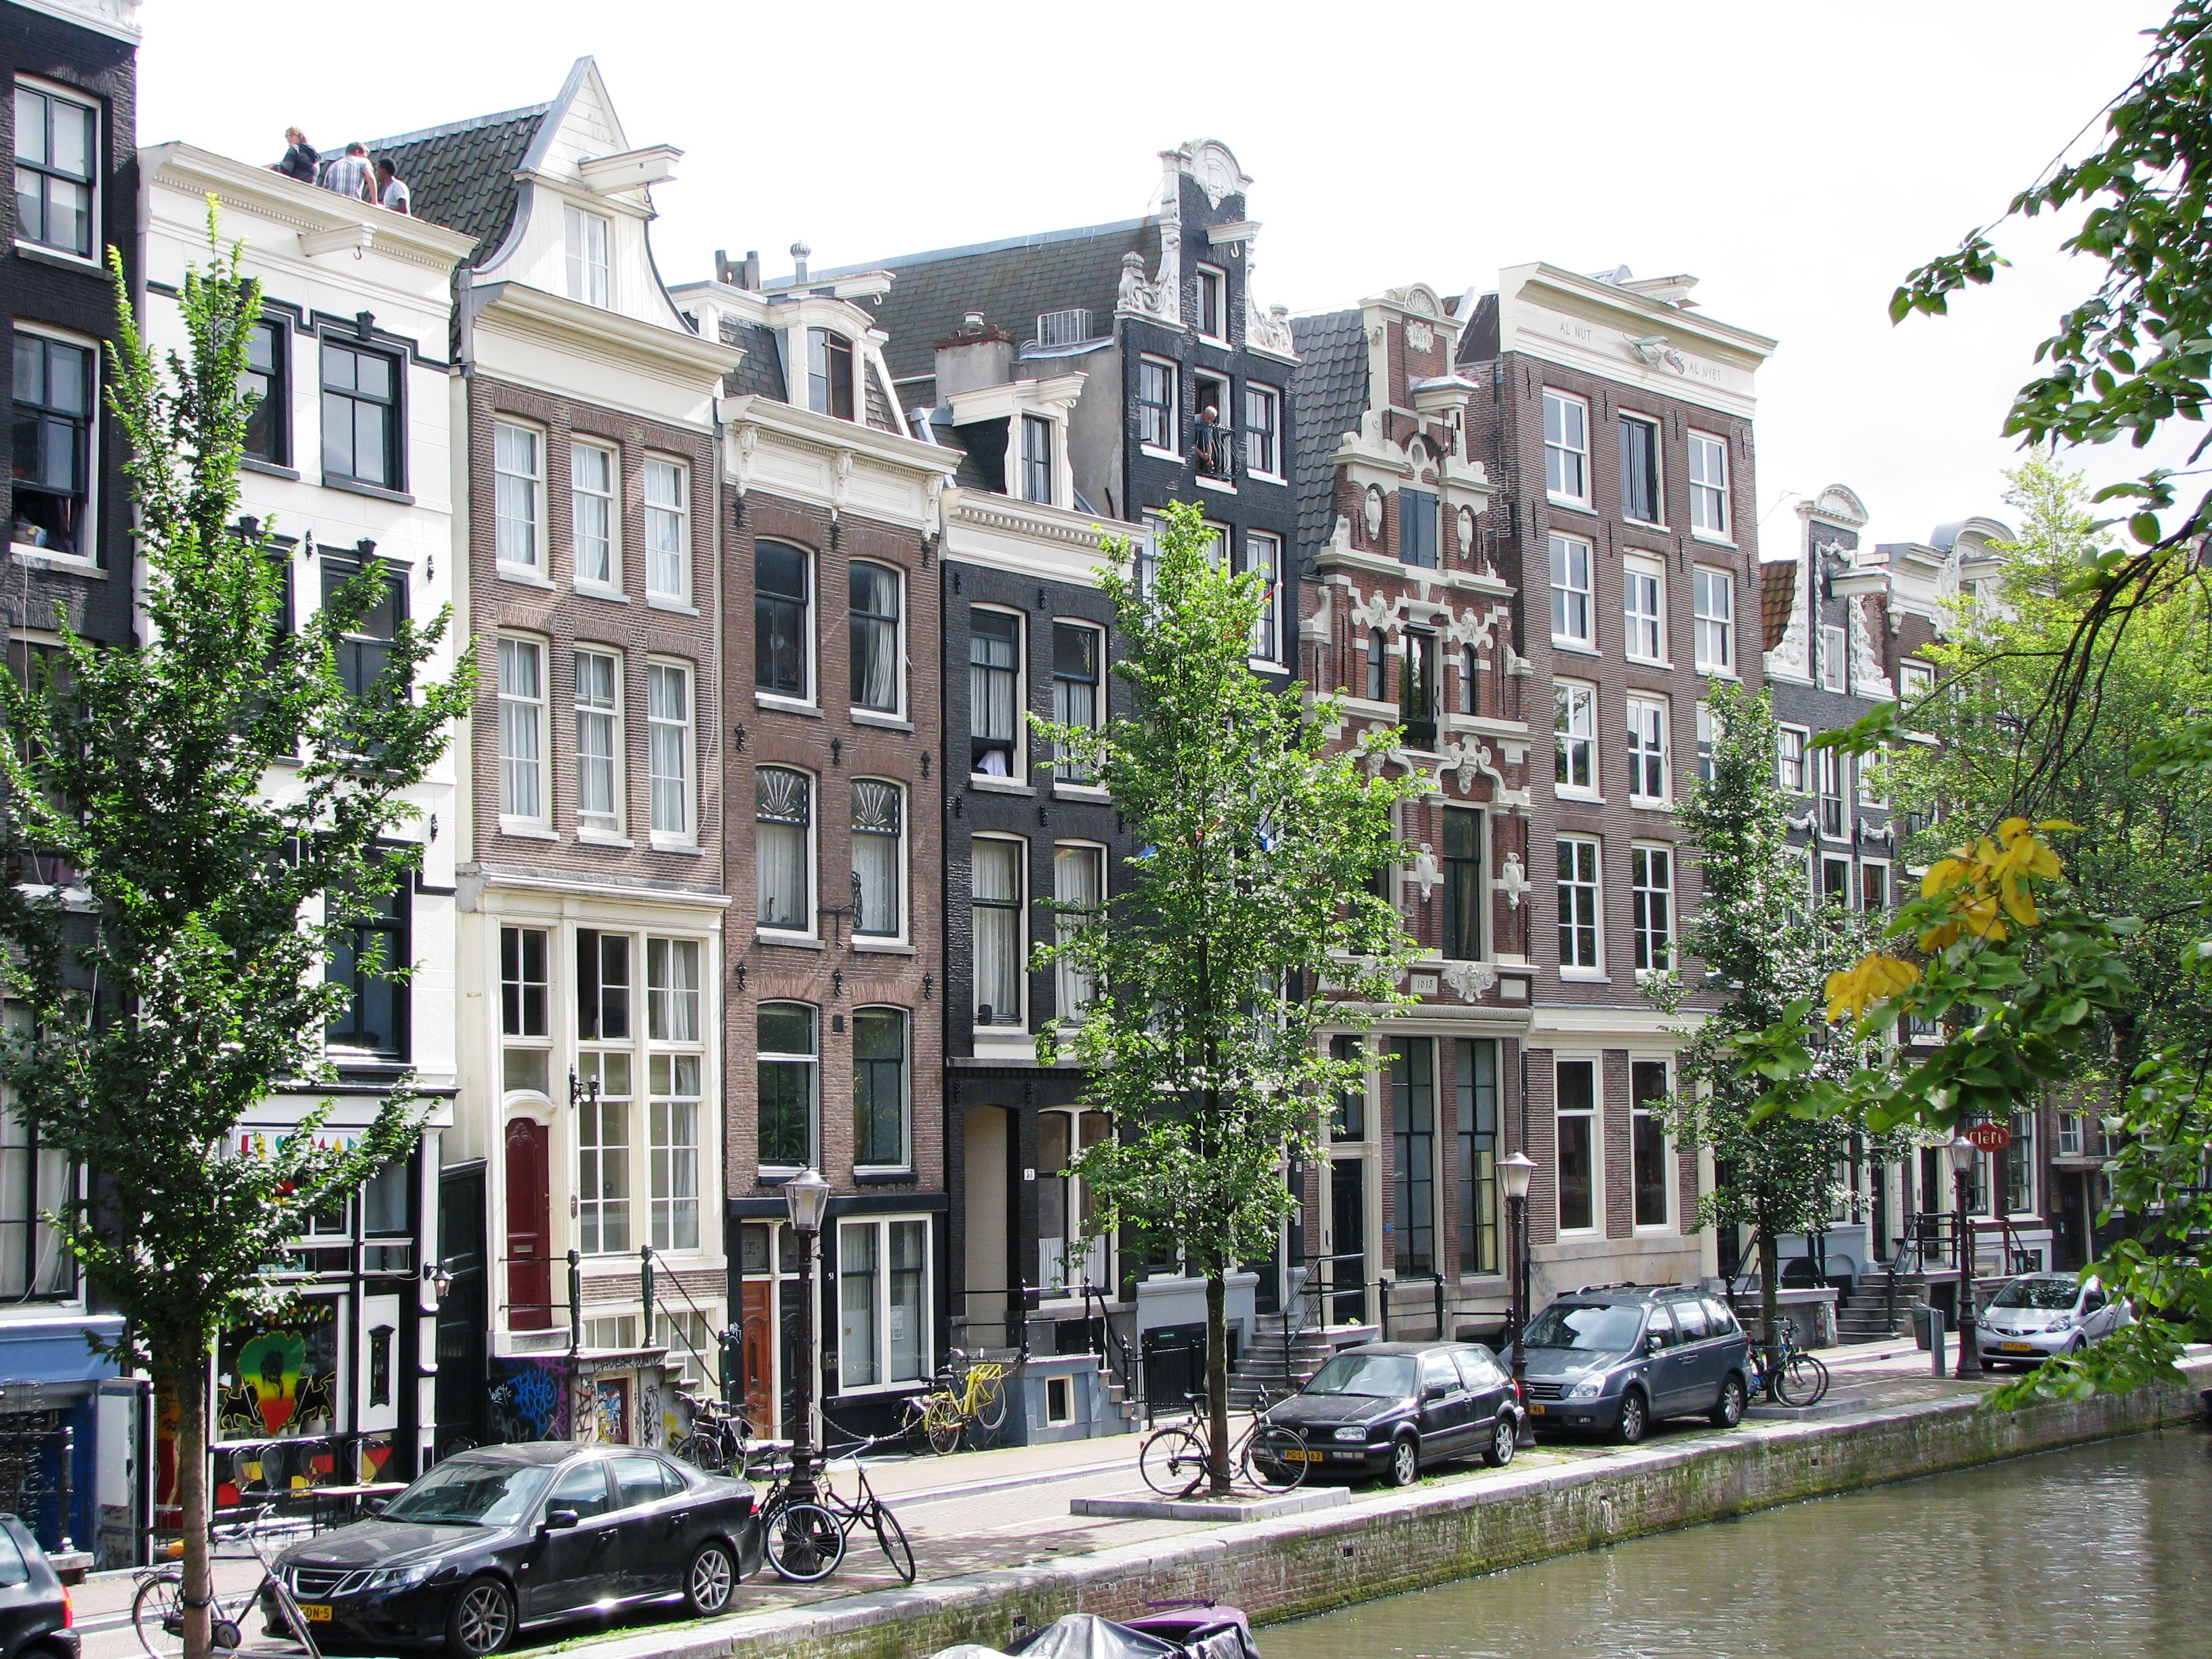 Amsterdam houses dating from 18-19 centu photo